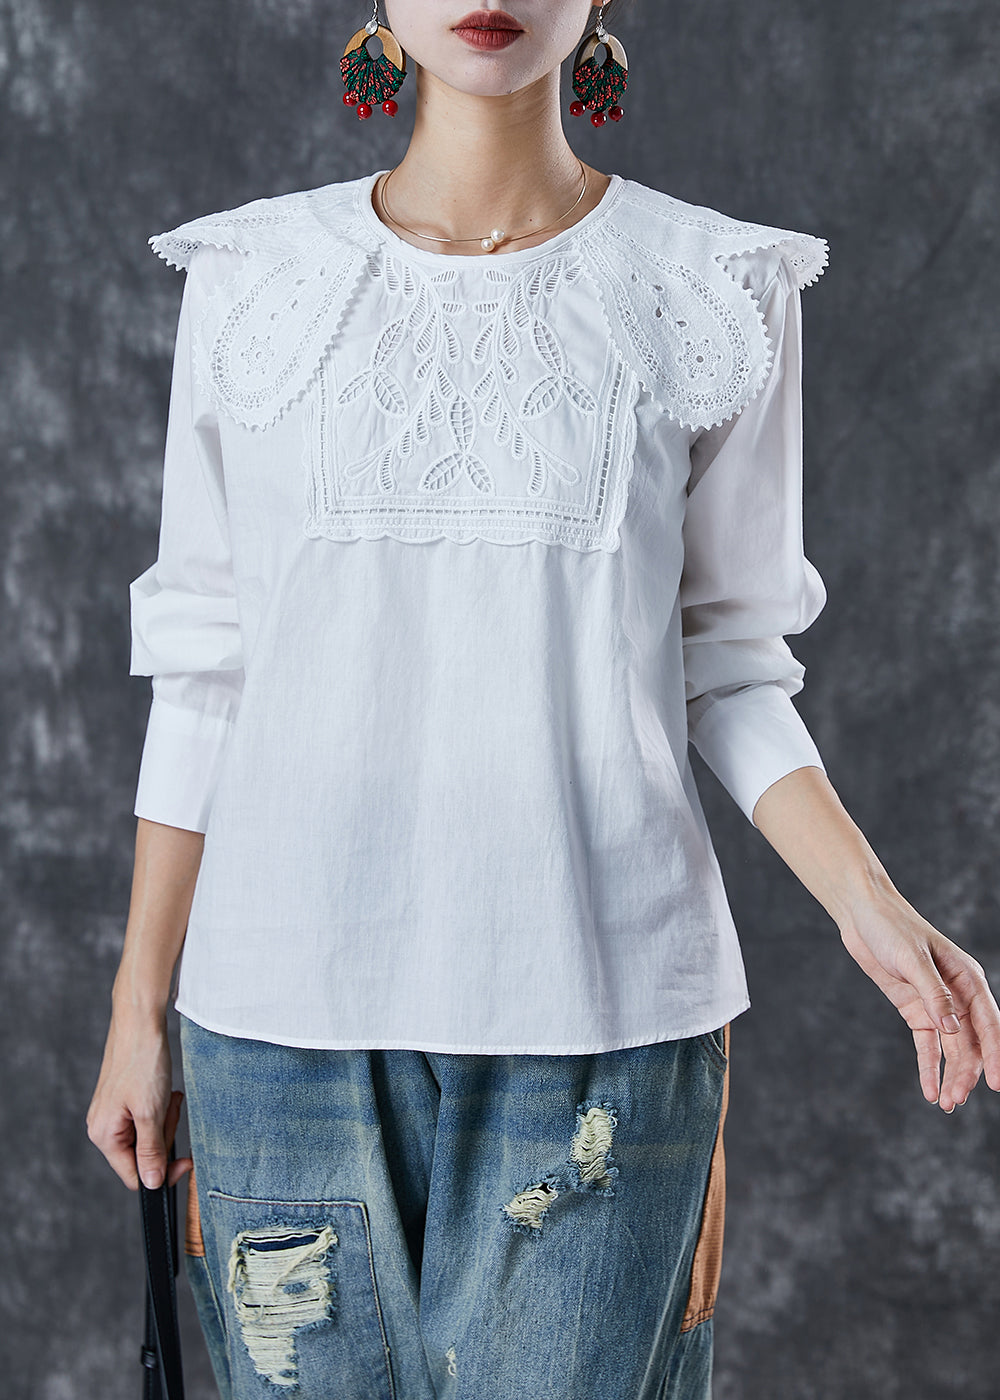 Art White O-Neck Lace Patchwork Cotton Shirt Top Fall